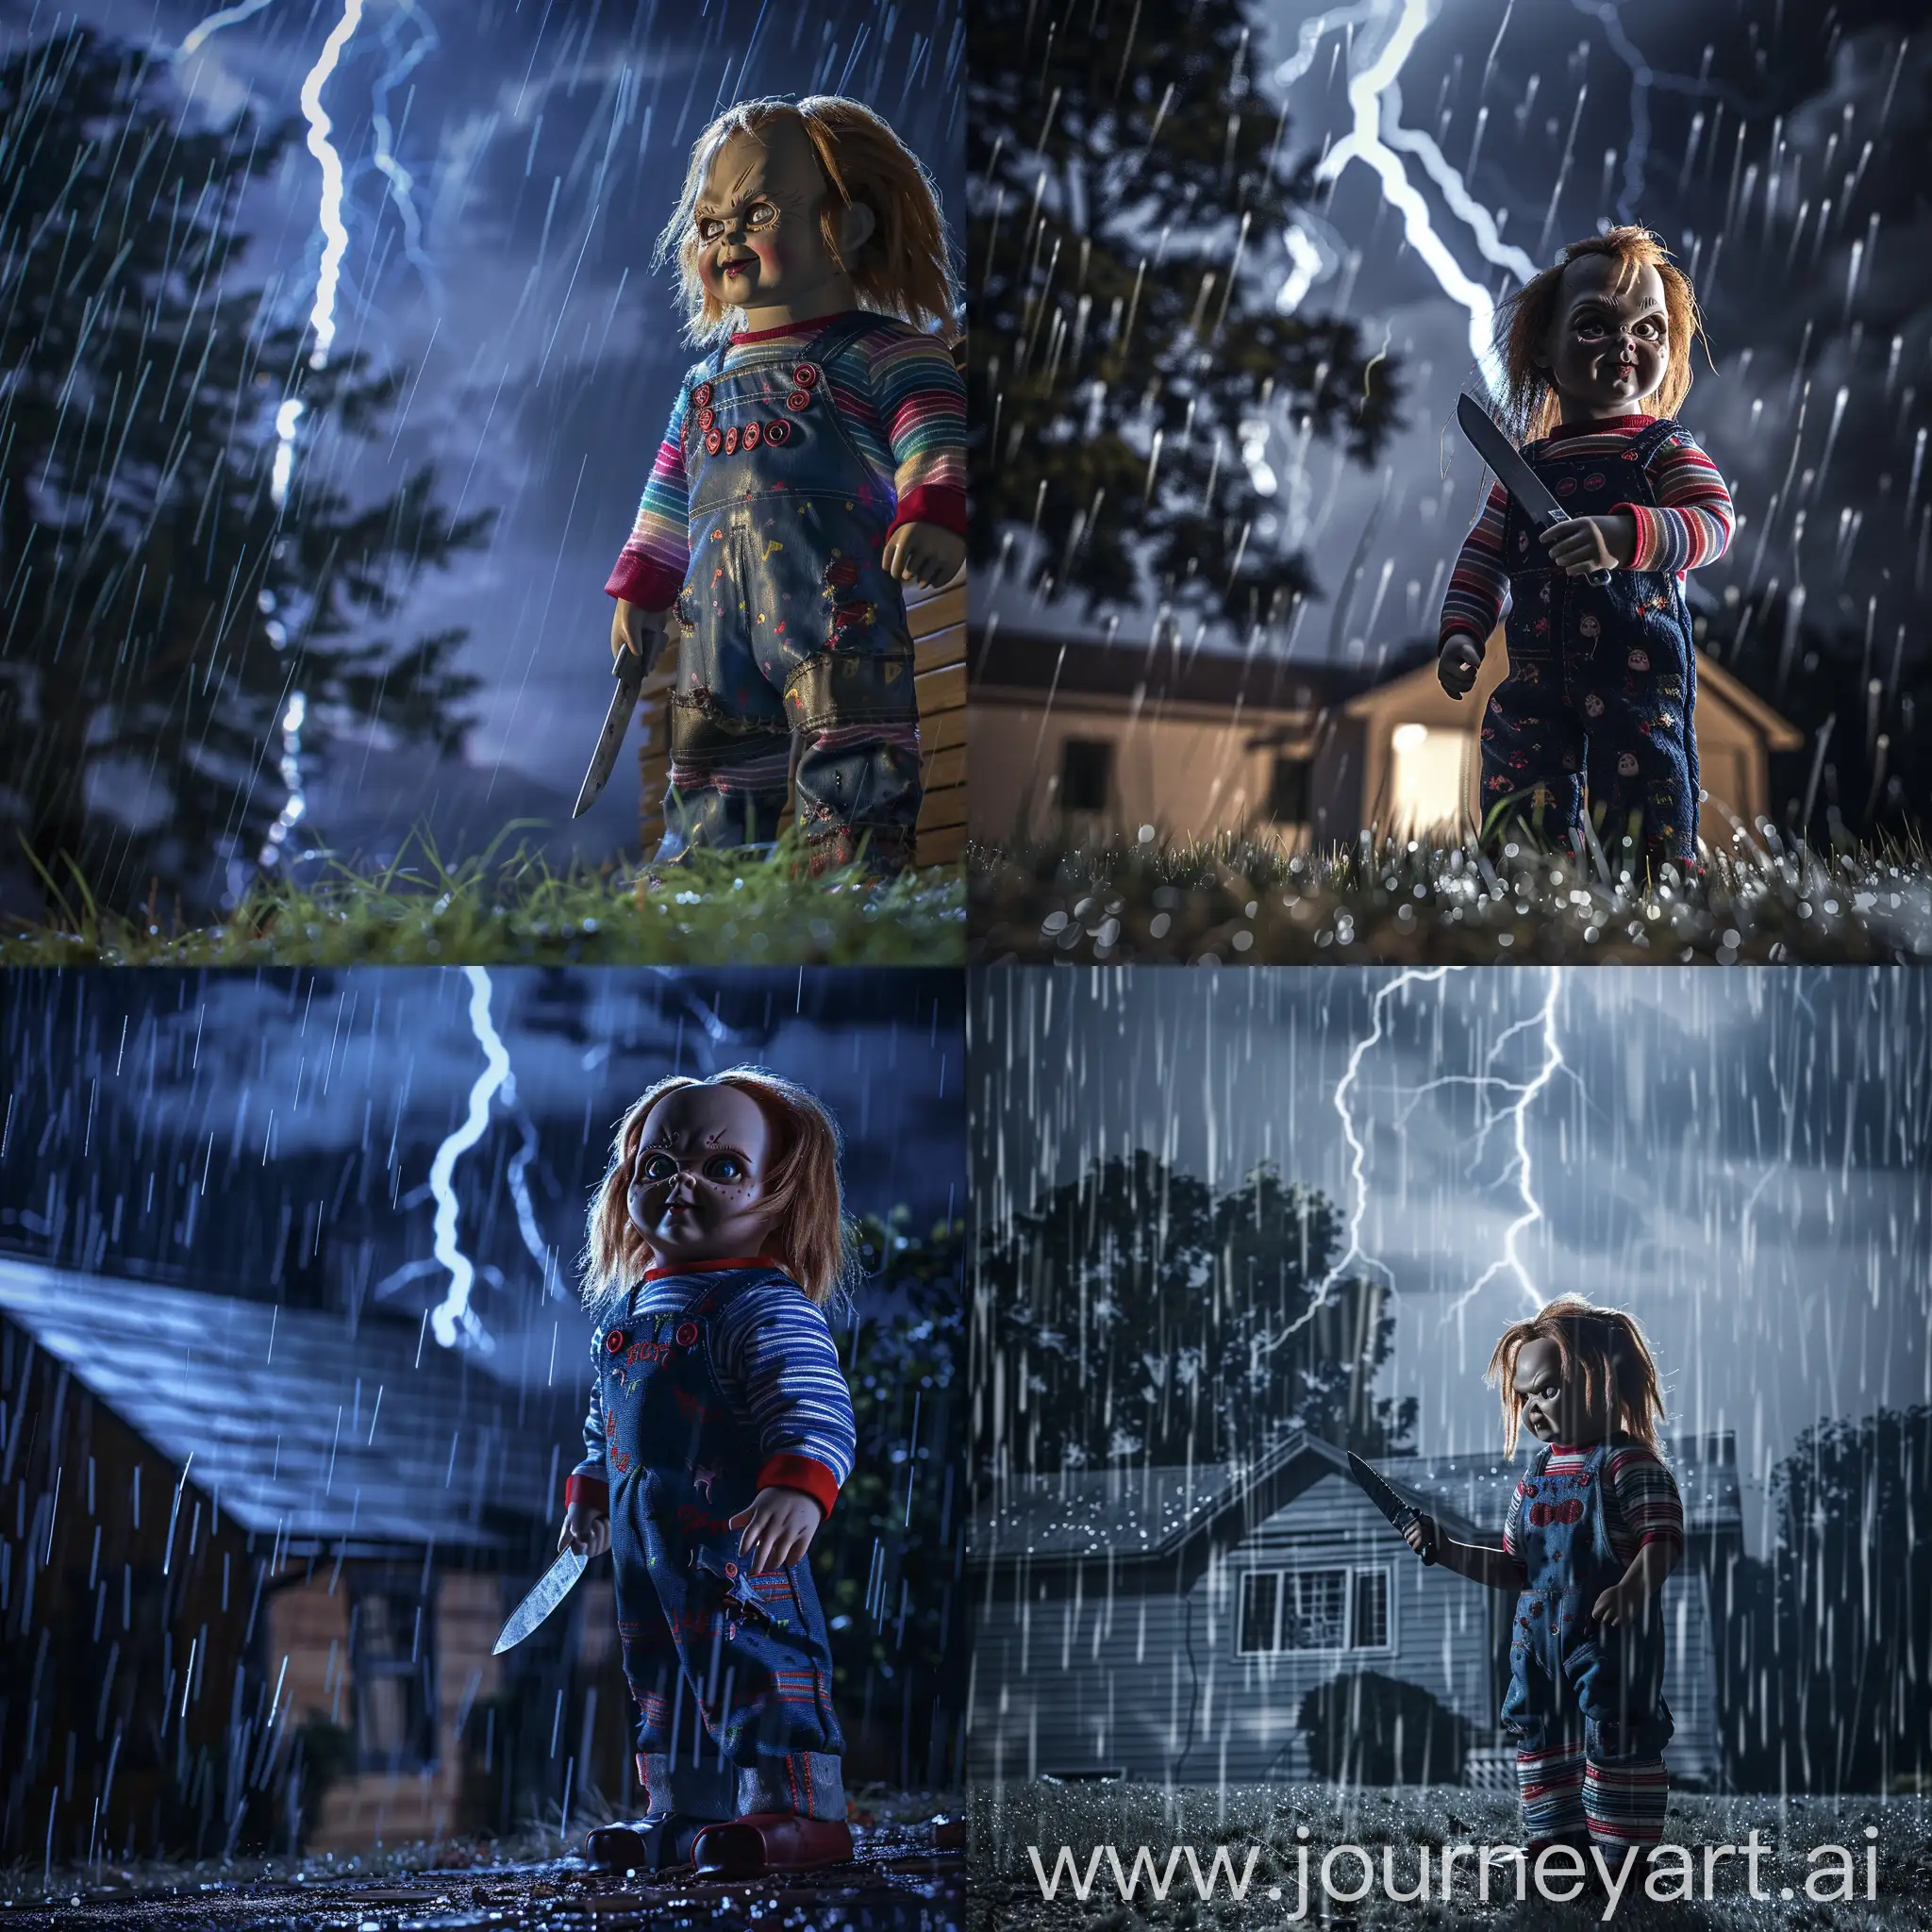 Horror movie icon Chucky standing at the yard of the house with a knife in his hand, midnight, thunderbolt striking background, rainy, cinematic lighting, realistic image